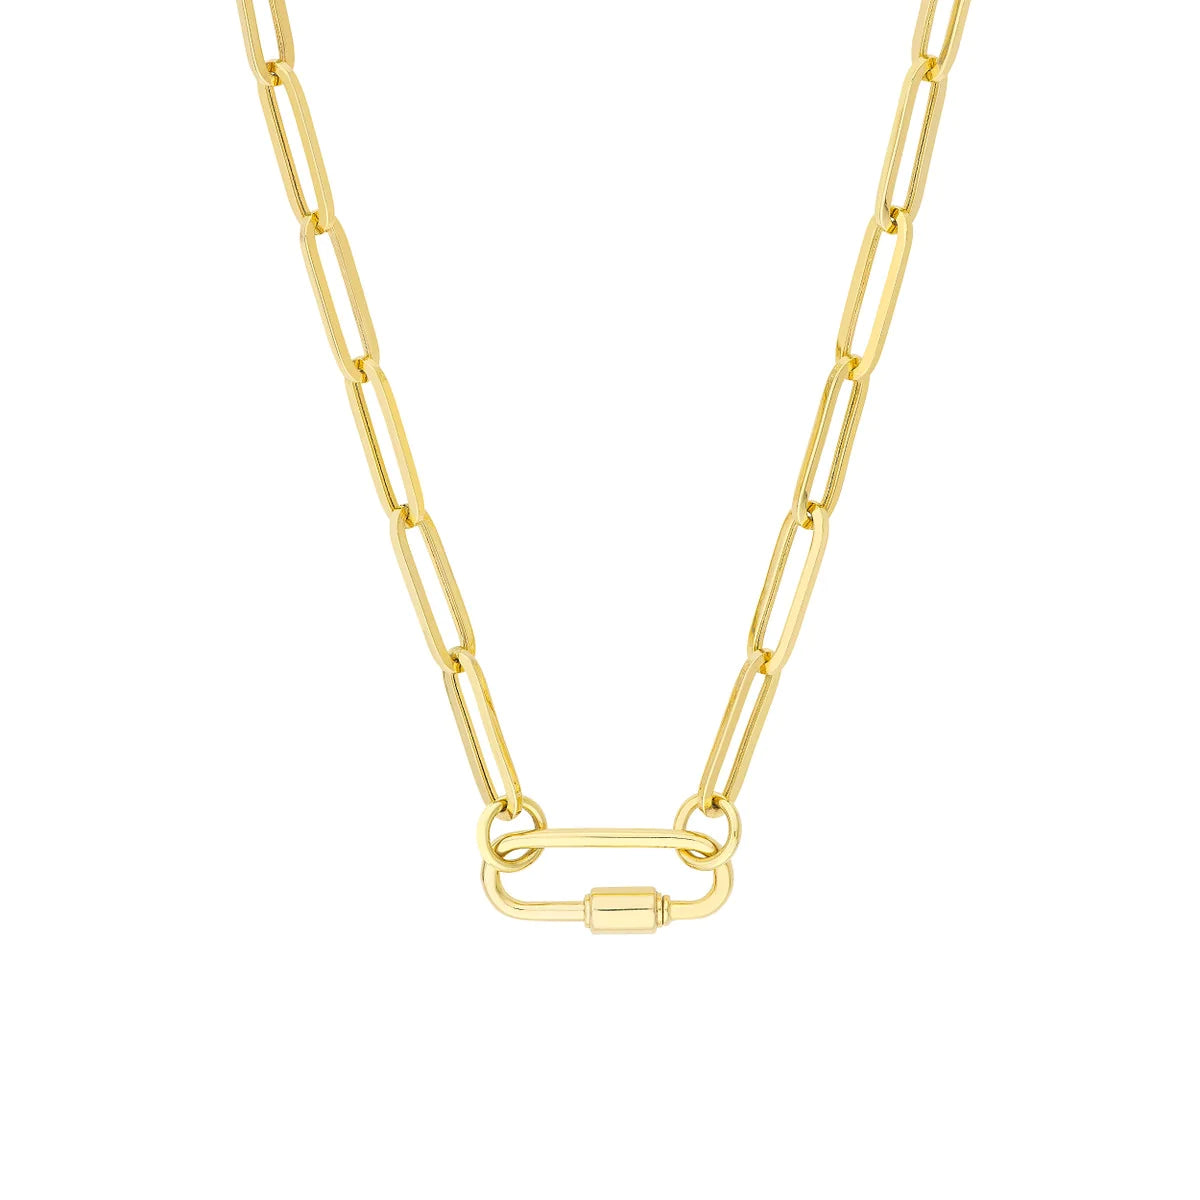 Yellow Gold Carabiner Lock Pendant - 14k Ribbed Clasp Opens Italy